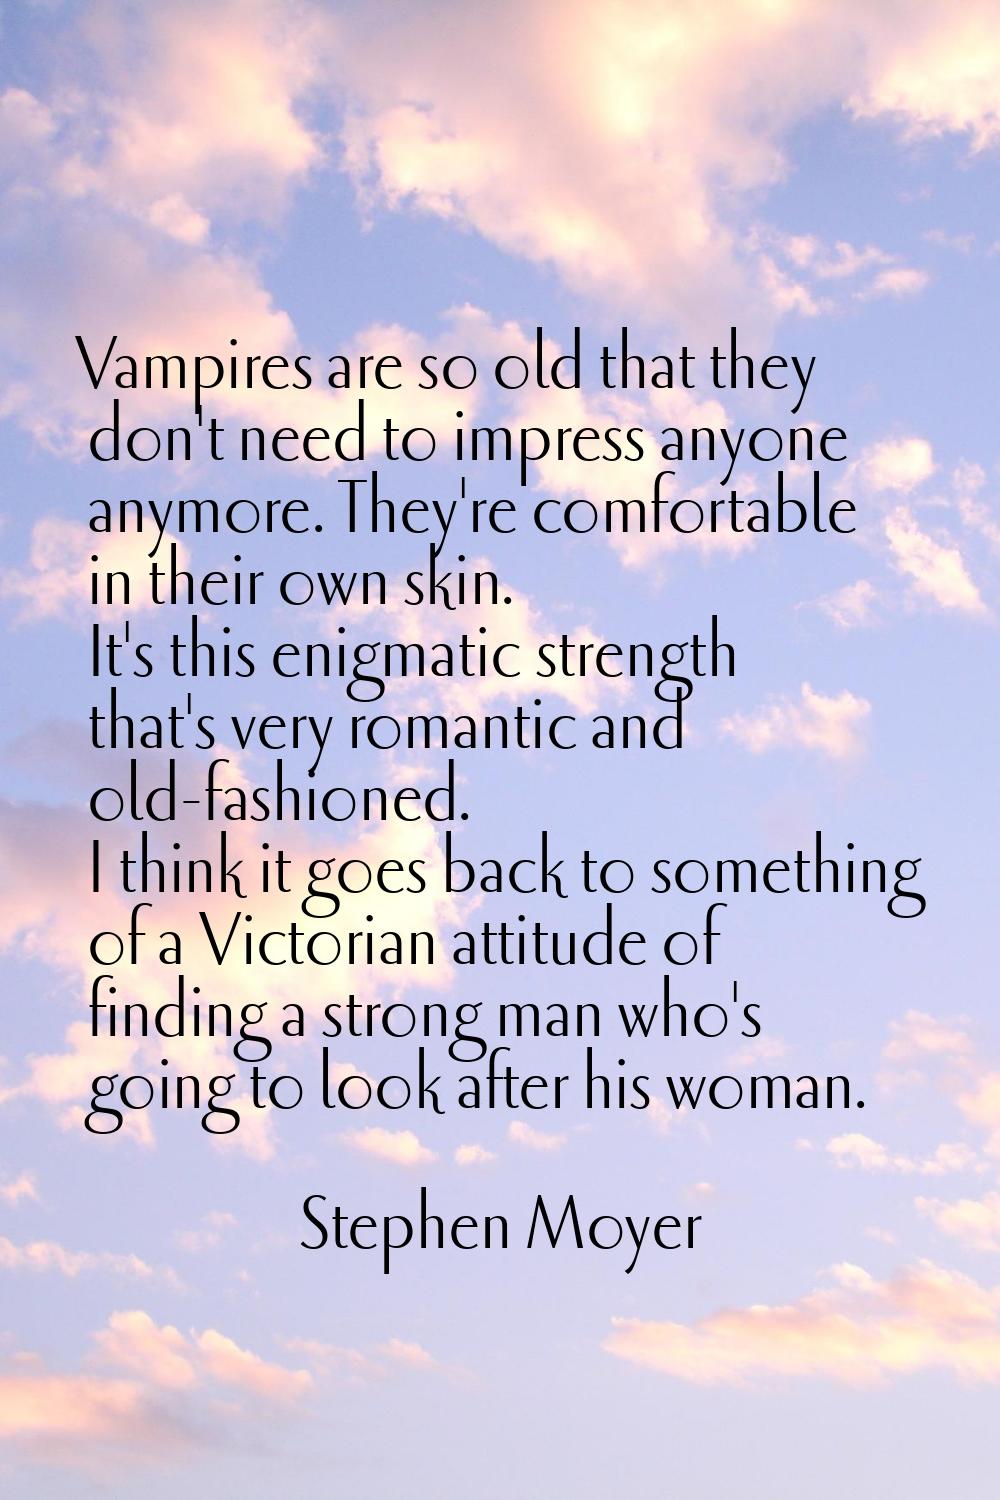 Vampires are so old that they don't need to impress anyone anymore. They're comfortable in their ow